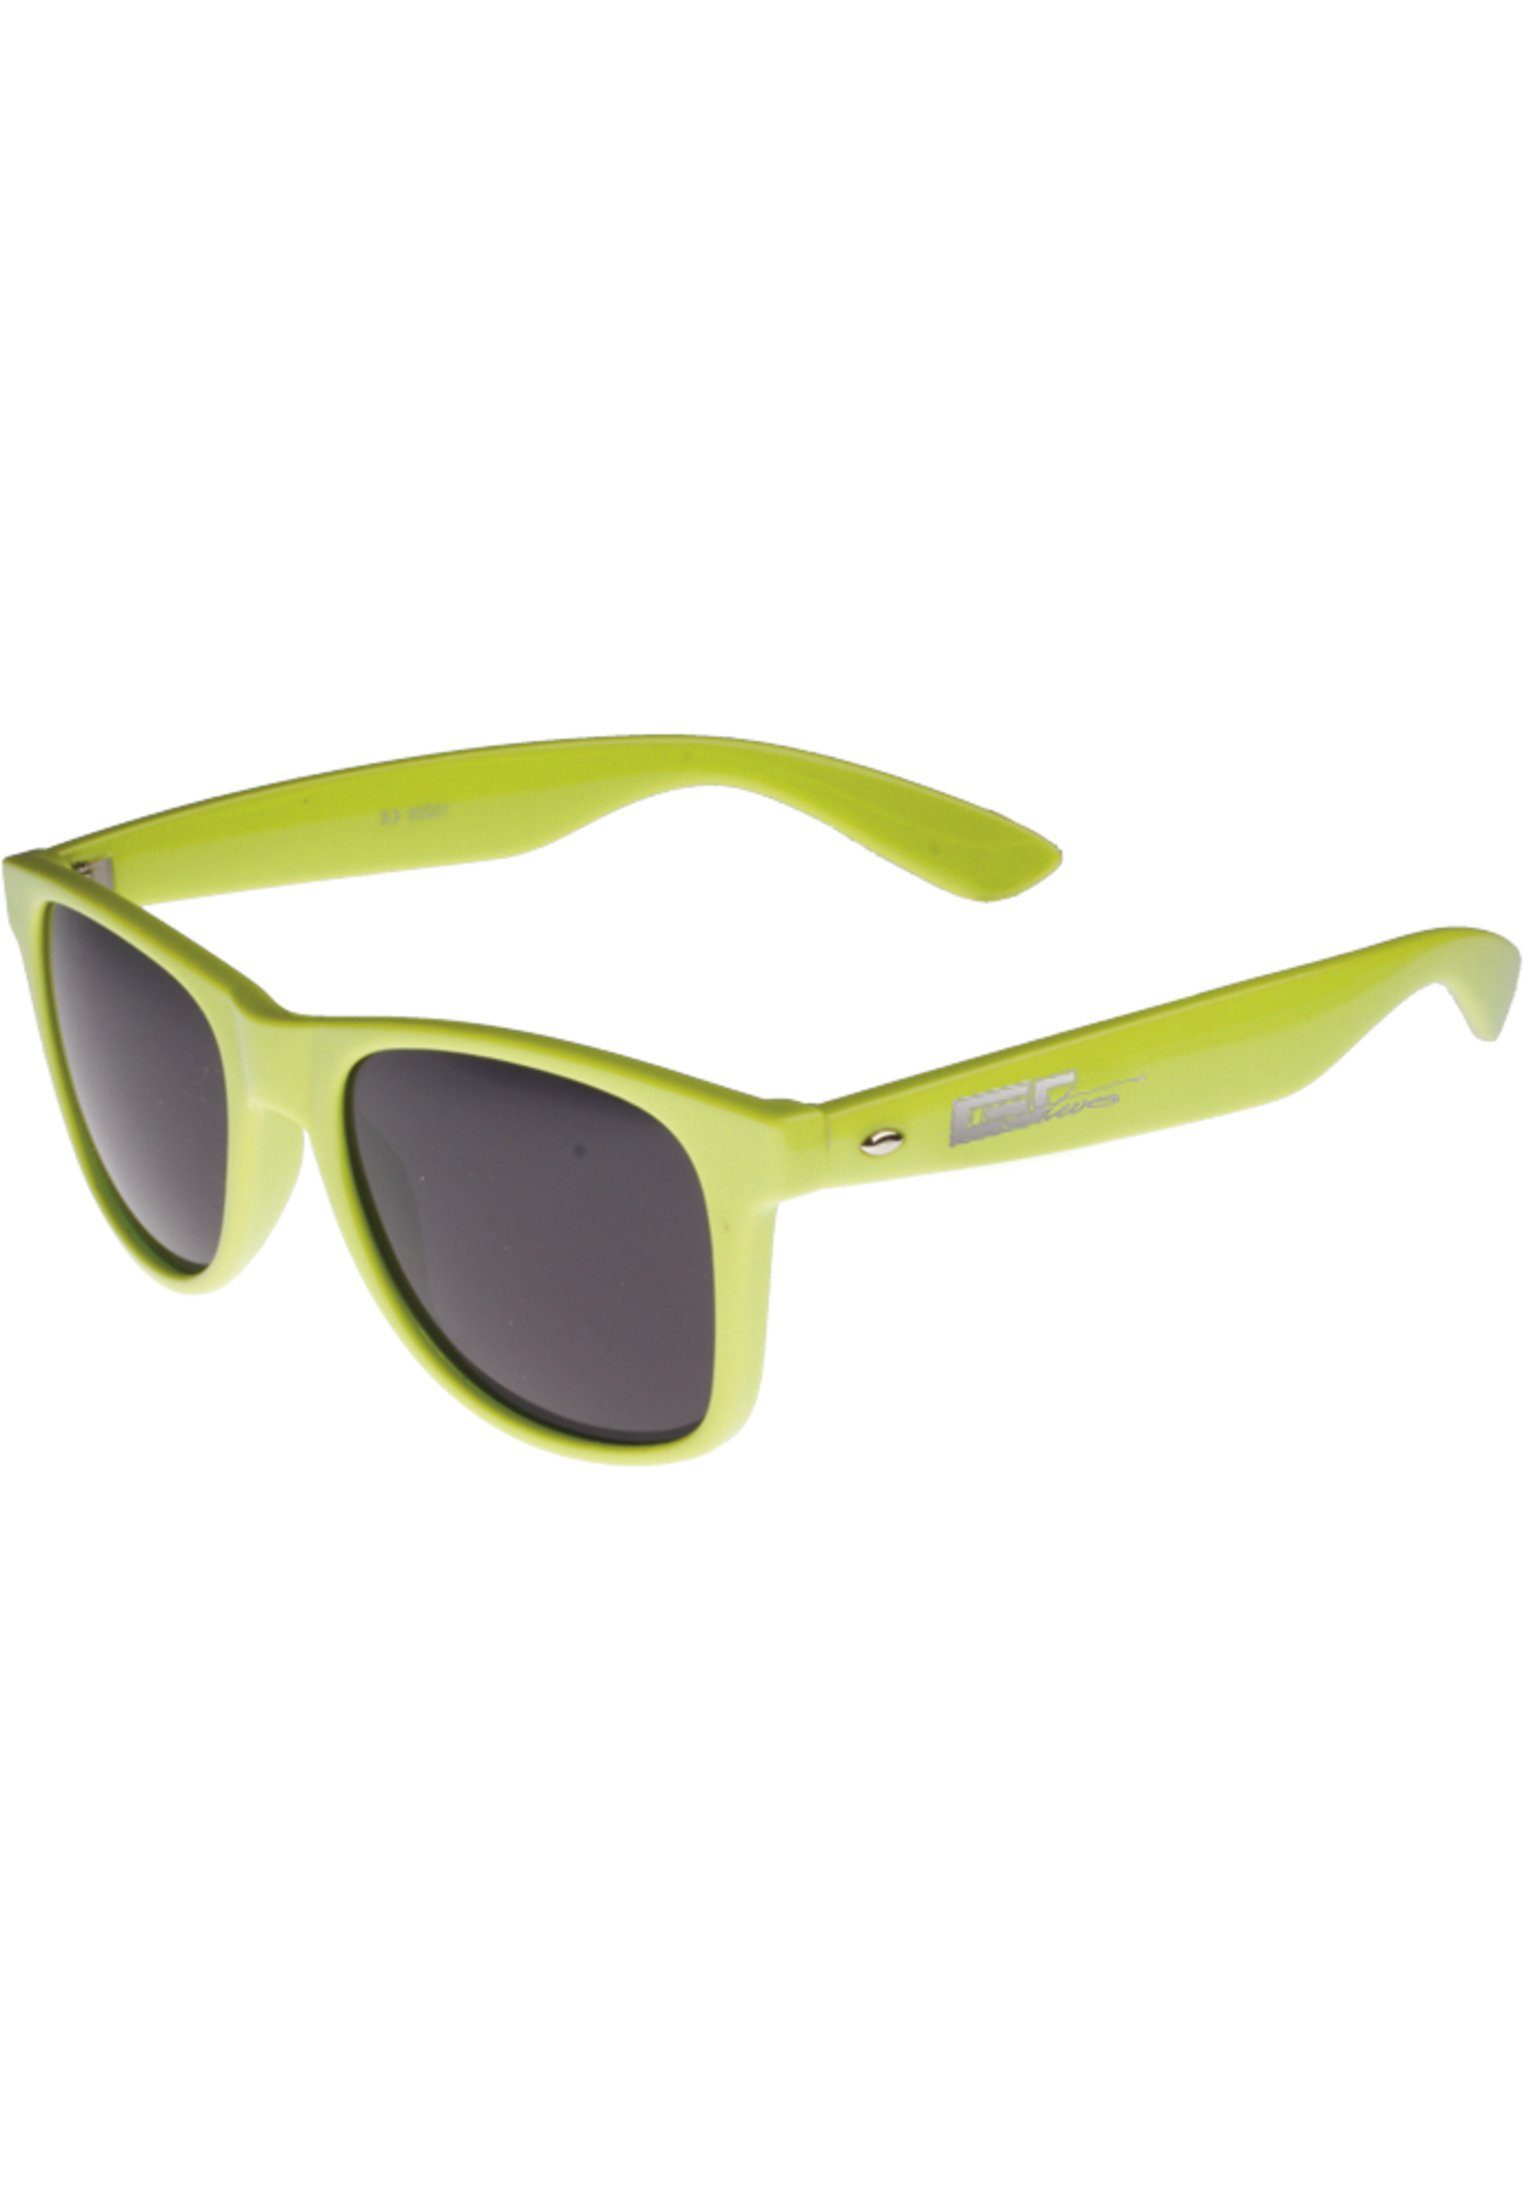 Accessoires Sonnenbrille GStwo neongreen Groove Shades MSTRDS